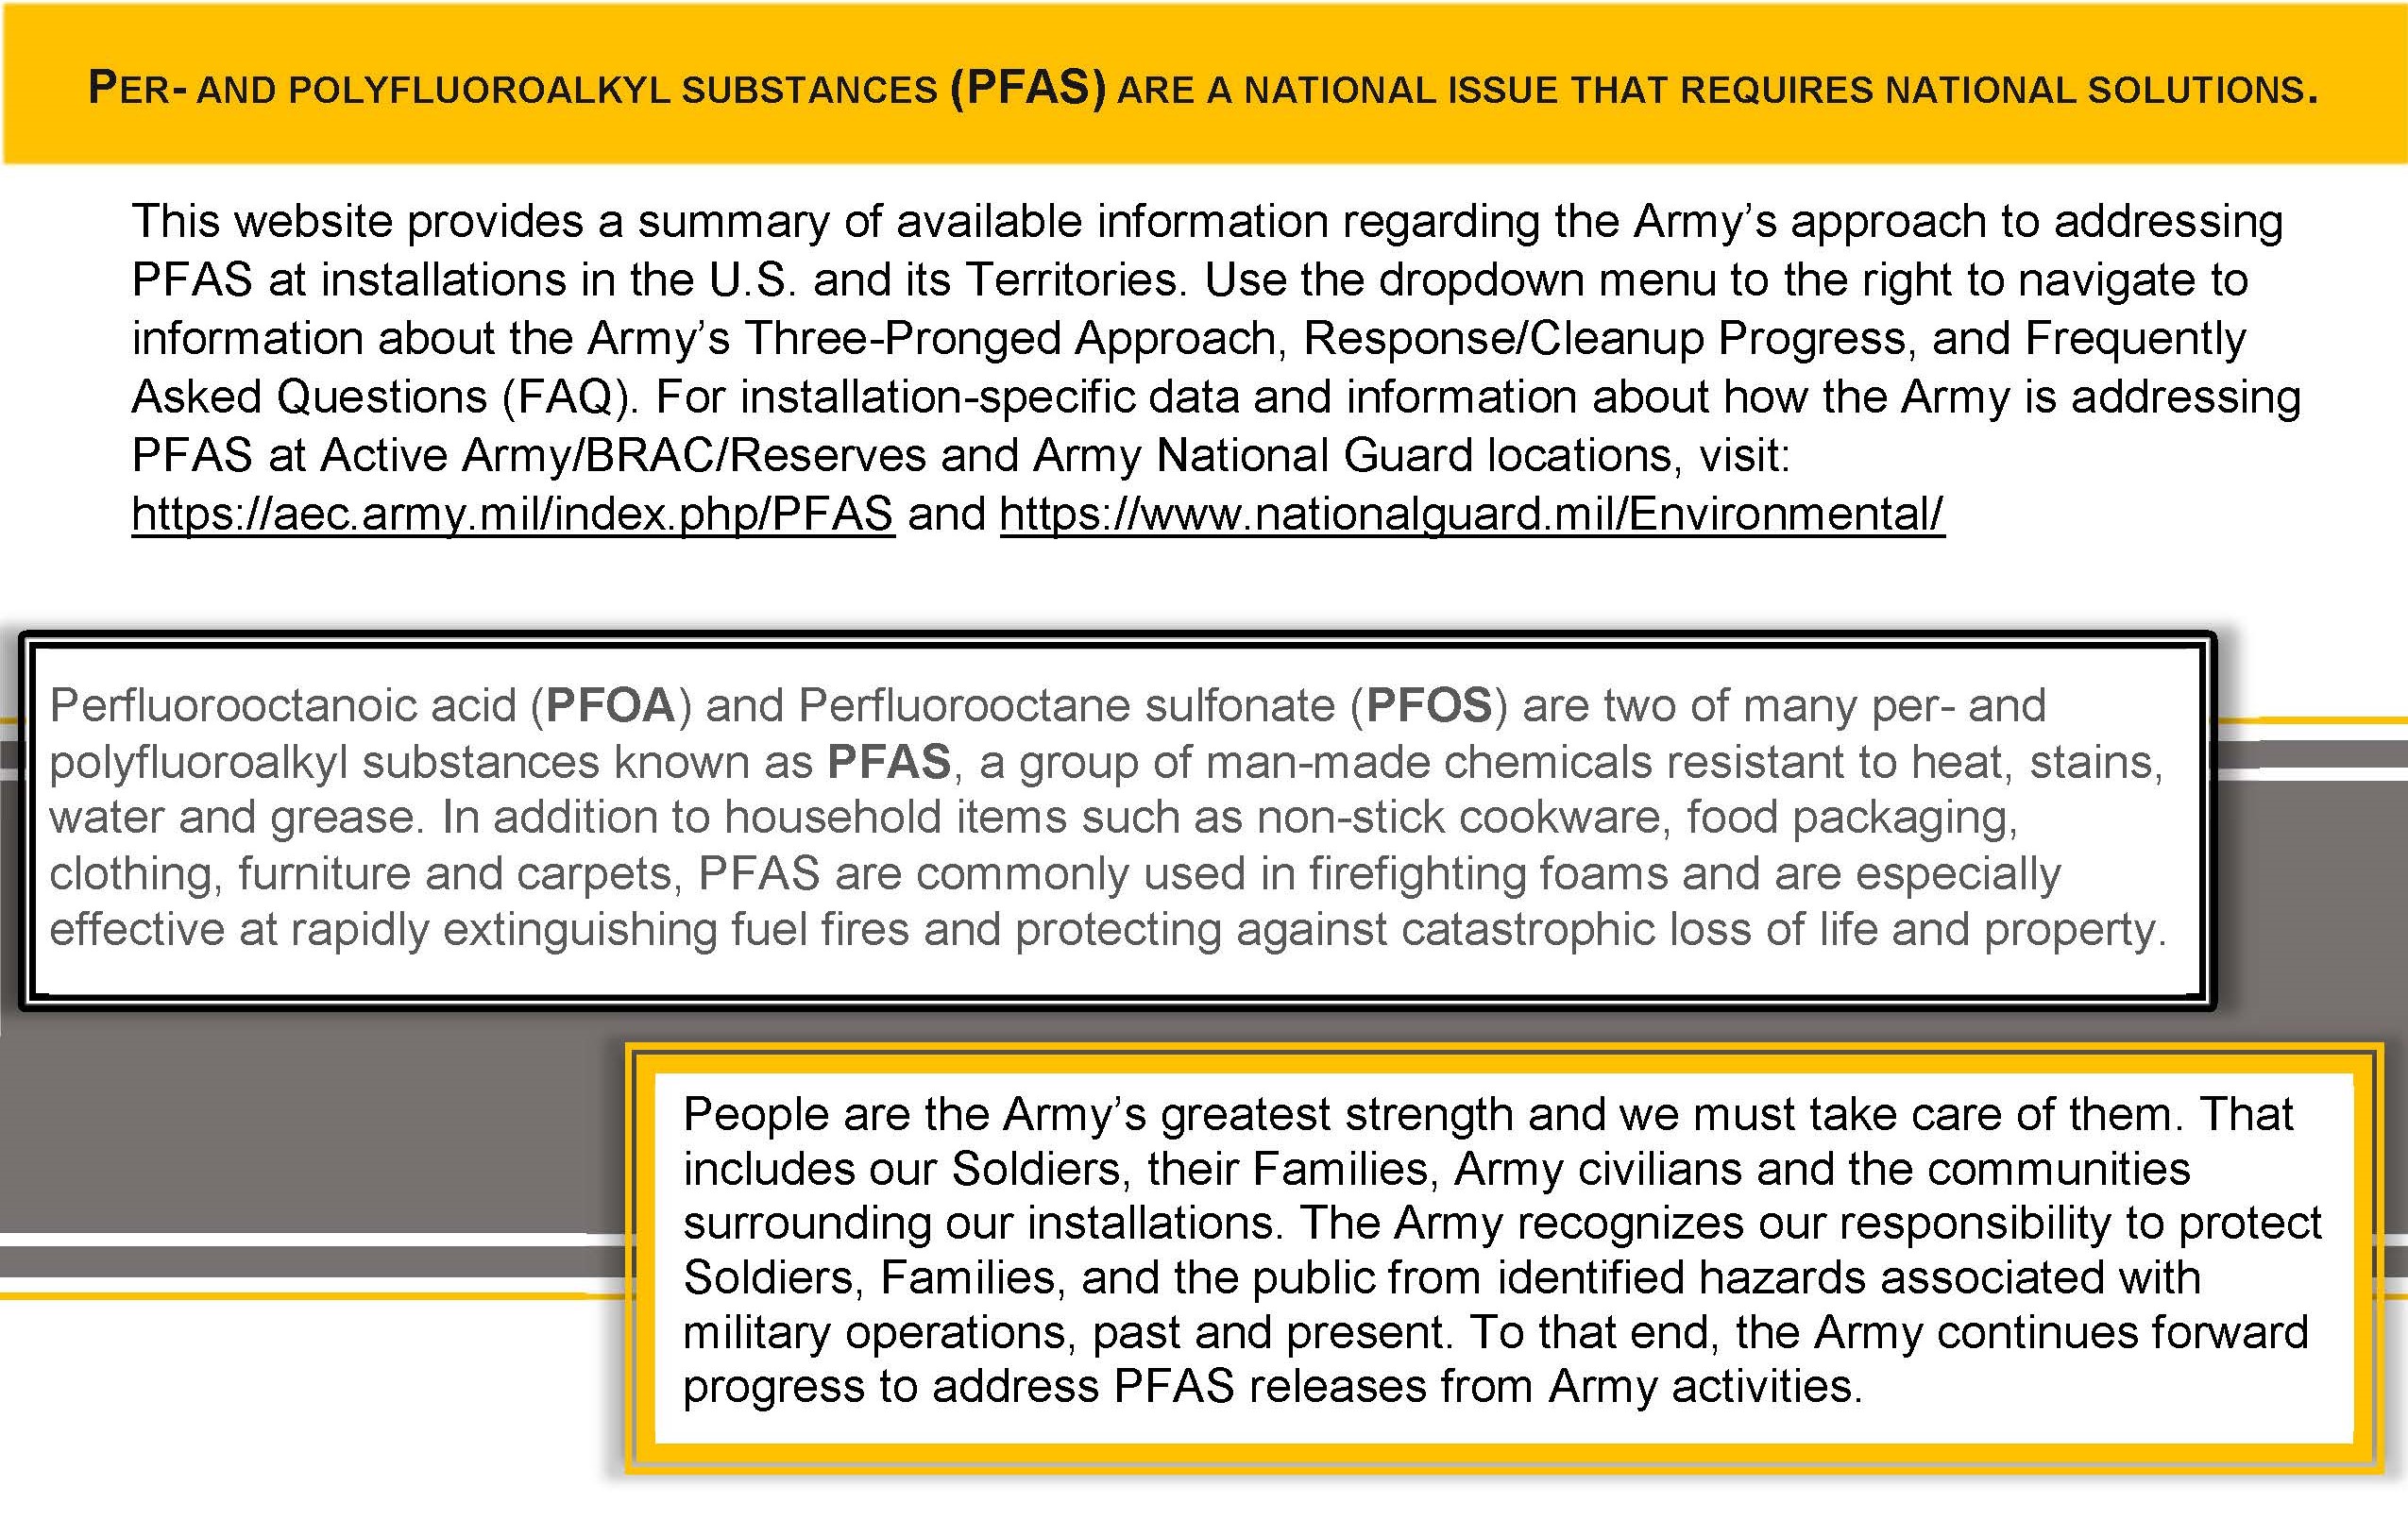 Per- and Polyfluoroalkyl Substances (PFAS) are a national issue that requires national solutions. This website provides a summary of available information regarding the Army?s approach to addressing PFAS at installations in the U.S. and its Territories. Use the dropdown menu to the right, or click on the text, to navigate to information about the Army?s Three-Pronged Approach, Response/Cleanup Progress, and Frequently Asked Questions (FAQ). For installation-specific data and information about how the Army is addressing PFAS at Active Army/BRAC/Reserves and Army National Guard locations, visit: https://aec.army.mil/index.php/PFAS and https://www.nationalguard.mil/Environmental/
Perfluorooctanoic acid (PFOA) and Perfluorooctane sulfonate (PFOS) are two of many per- and polyfluoroalkyl substances known as PFAS, a group of man-made chemicals resistant to heat, stains, water and grease. In addition to household items such as non-stick cookware, food packaging, clothing, furniture and carpets, PFAS are commonly used in firefighting foams and are especially effective at rapidly extinguishing fuel fires and protecting against catastrophic loss of life and property.
	People are the Army?s greatest strength and we must take care of them. That includes our Soldiers, their Families, Army civilians and the communities surrounding our installations. The Army recognizes our responsibility to protect Soldiers, Families, and the public from identified hazards associated with military operations, past and present. To that end, the Army continues forward progress to address PFAS releases from Army activities.